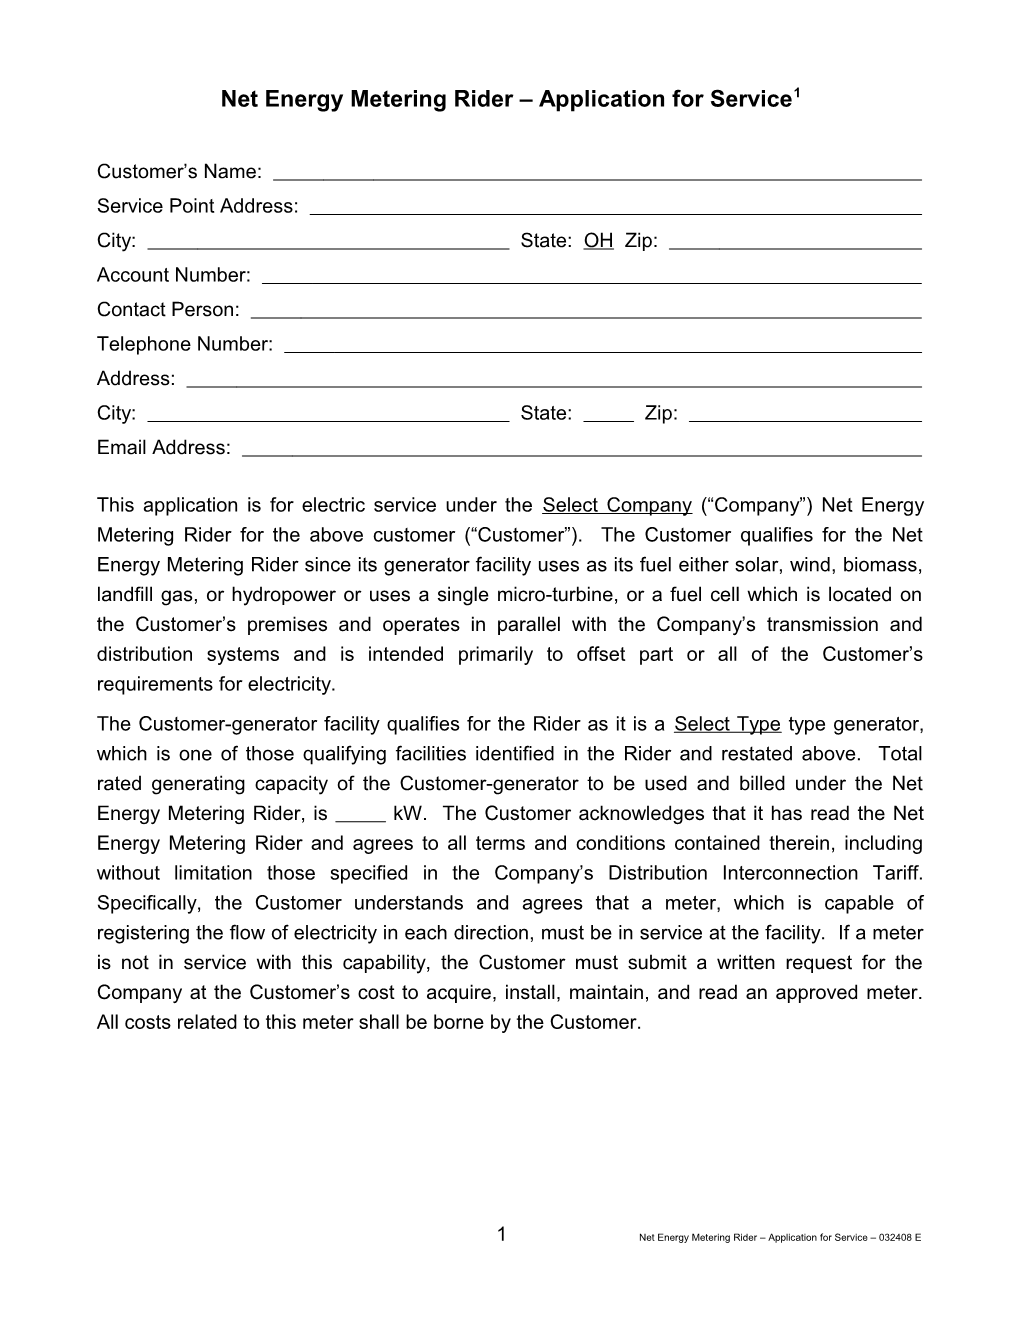 Net Energy Metering Rider Application for Service